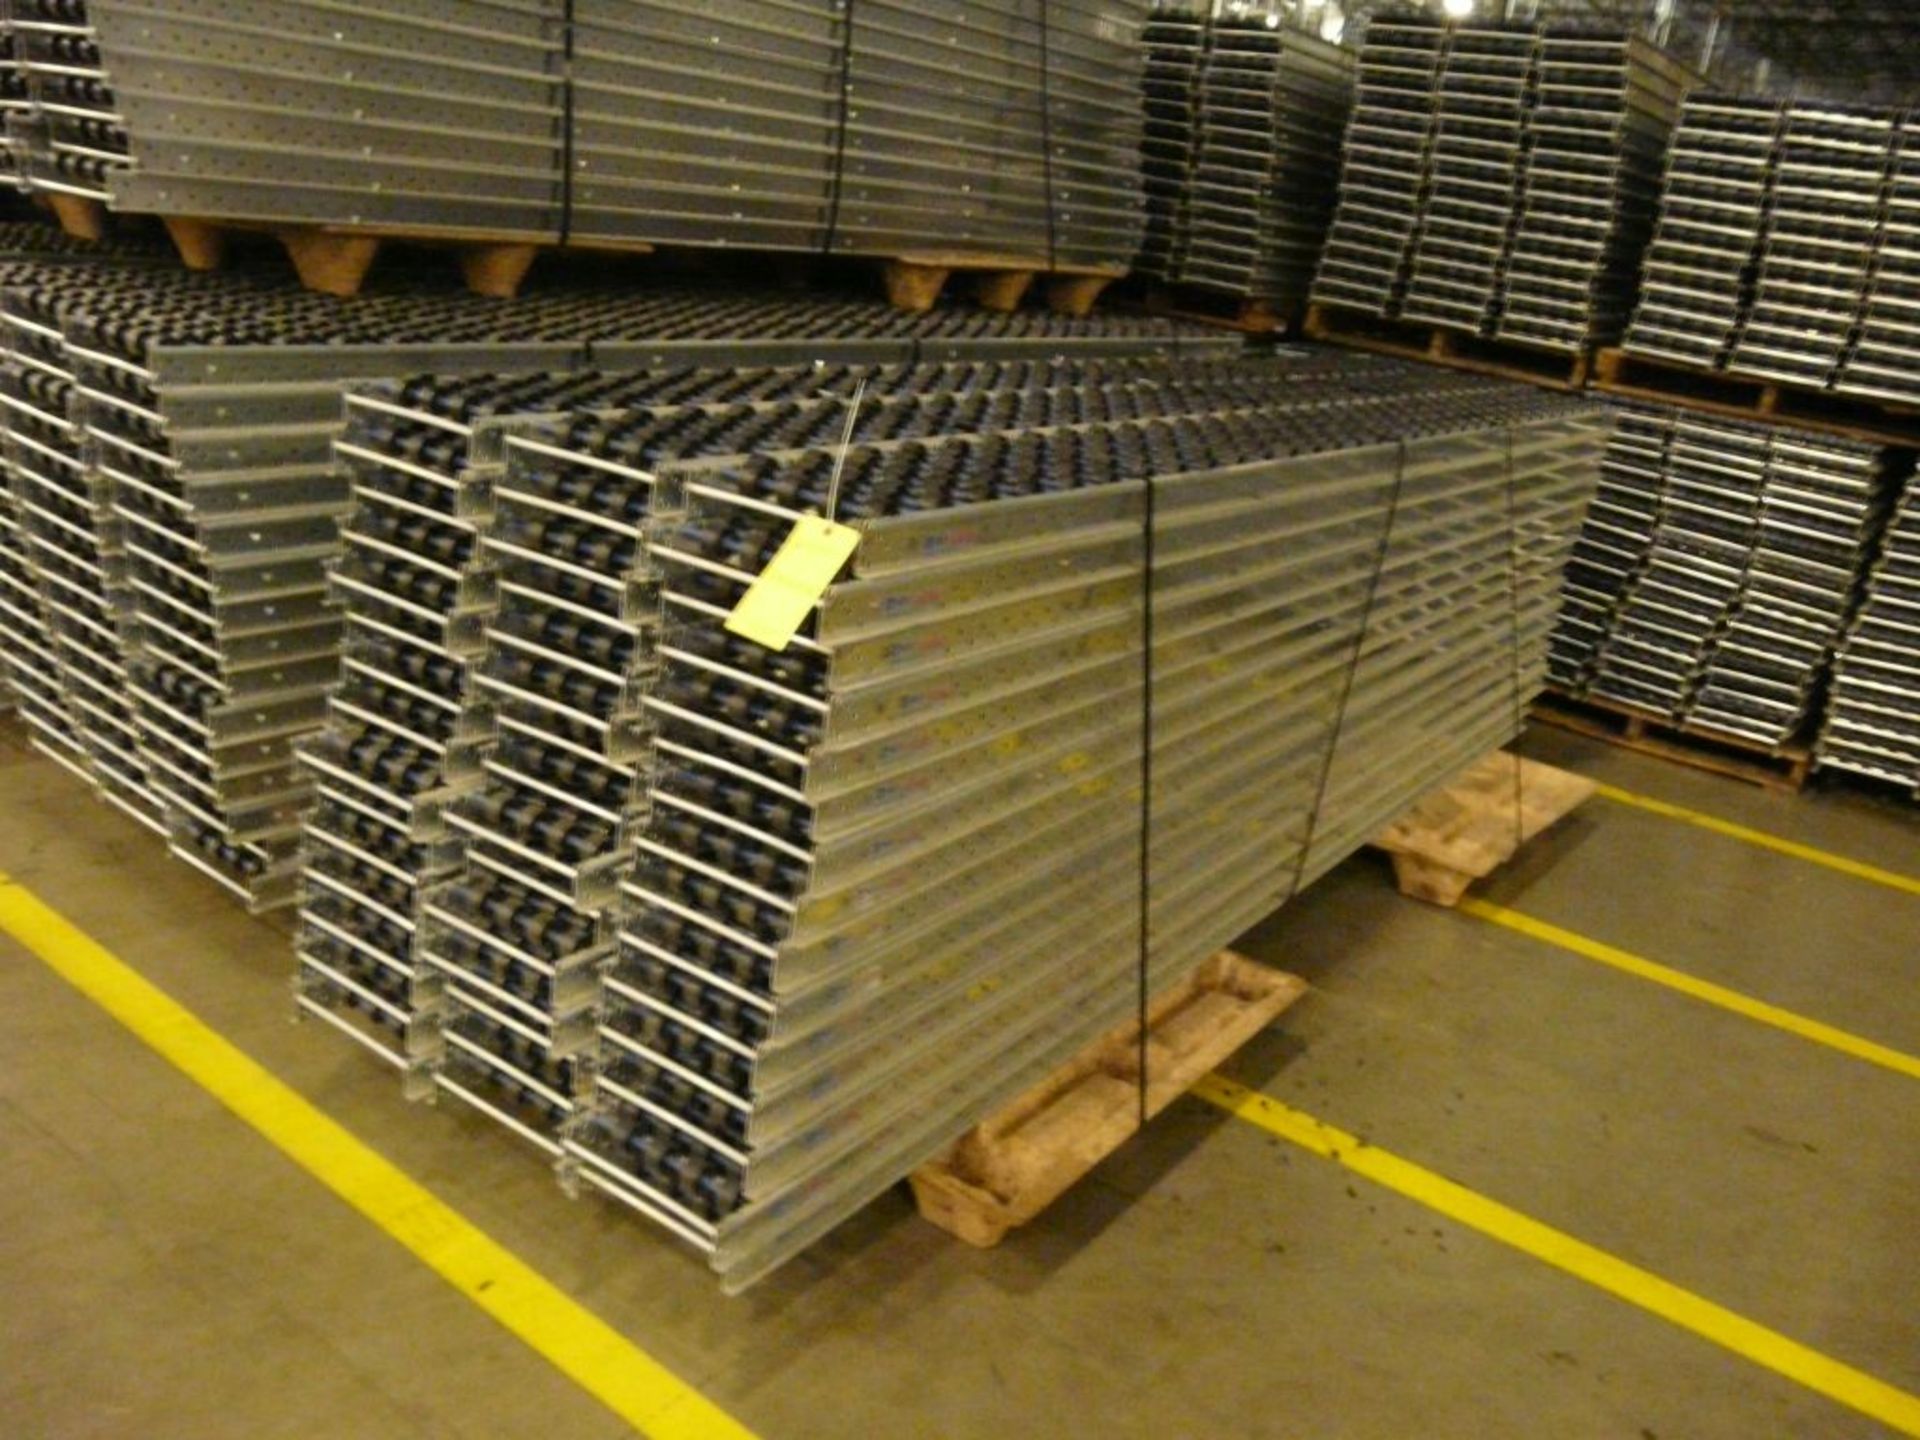 Lot of (90) SpanTrack Wheelbed Carton Flow Conveyors - 11.5'L x 11"W; Tag: 223610 - $30 Lot